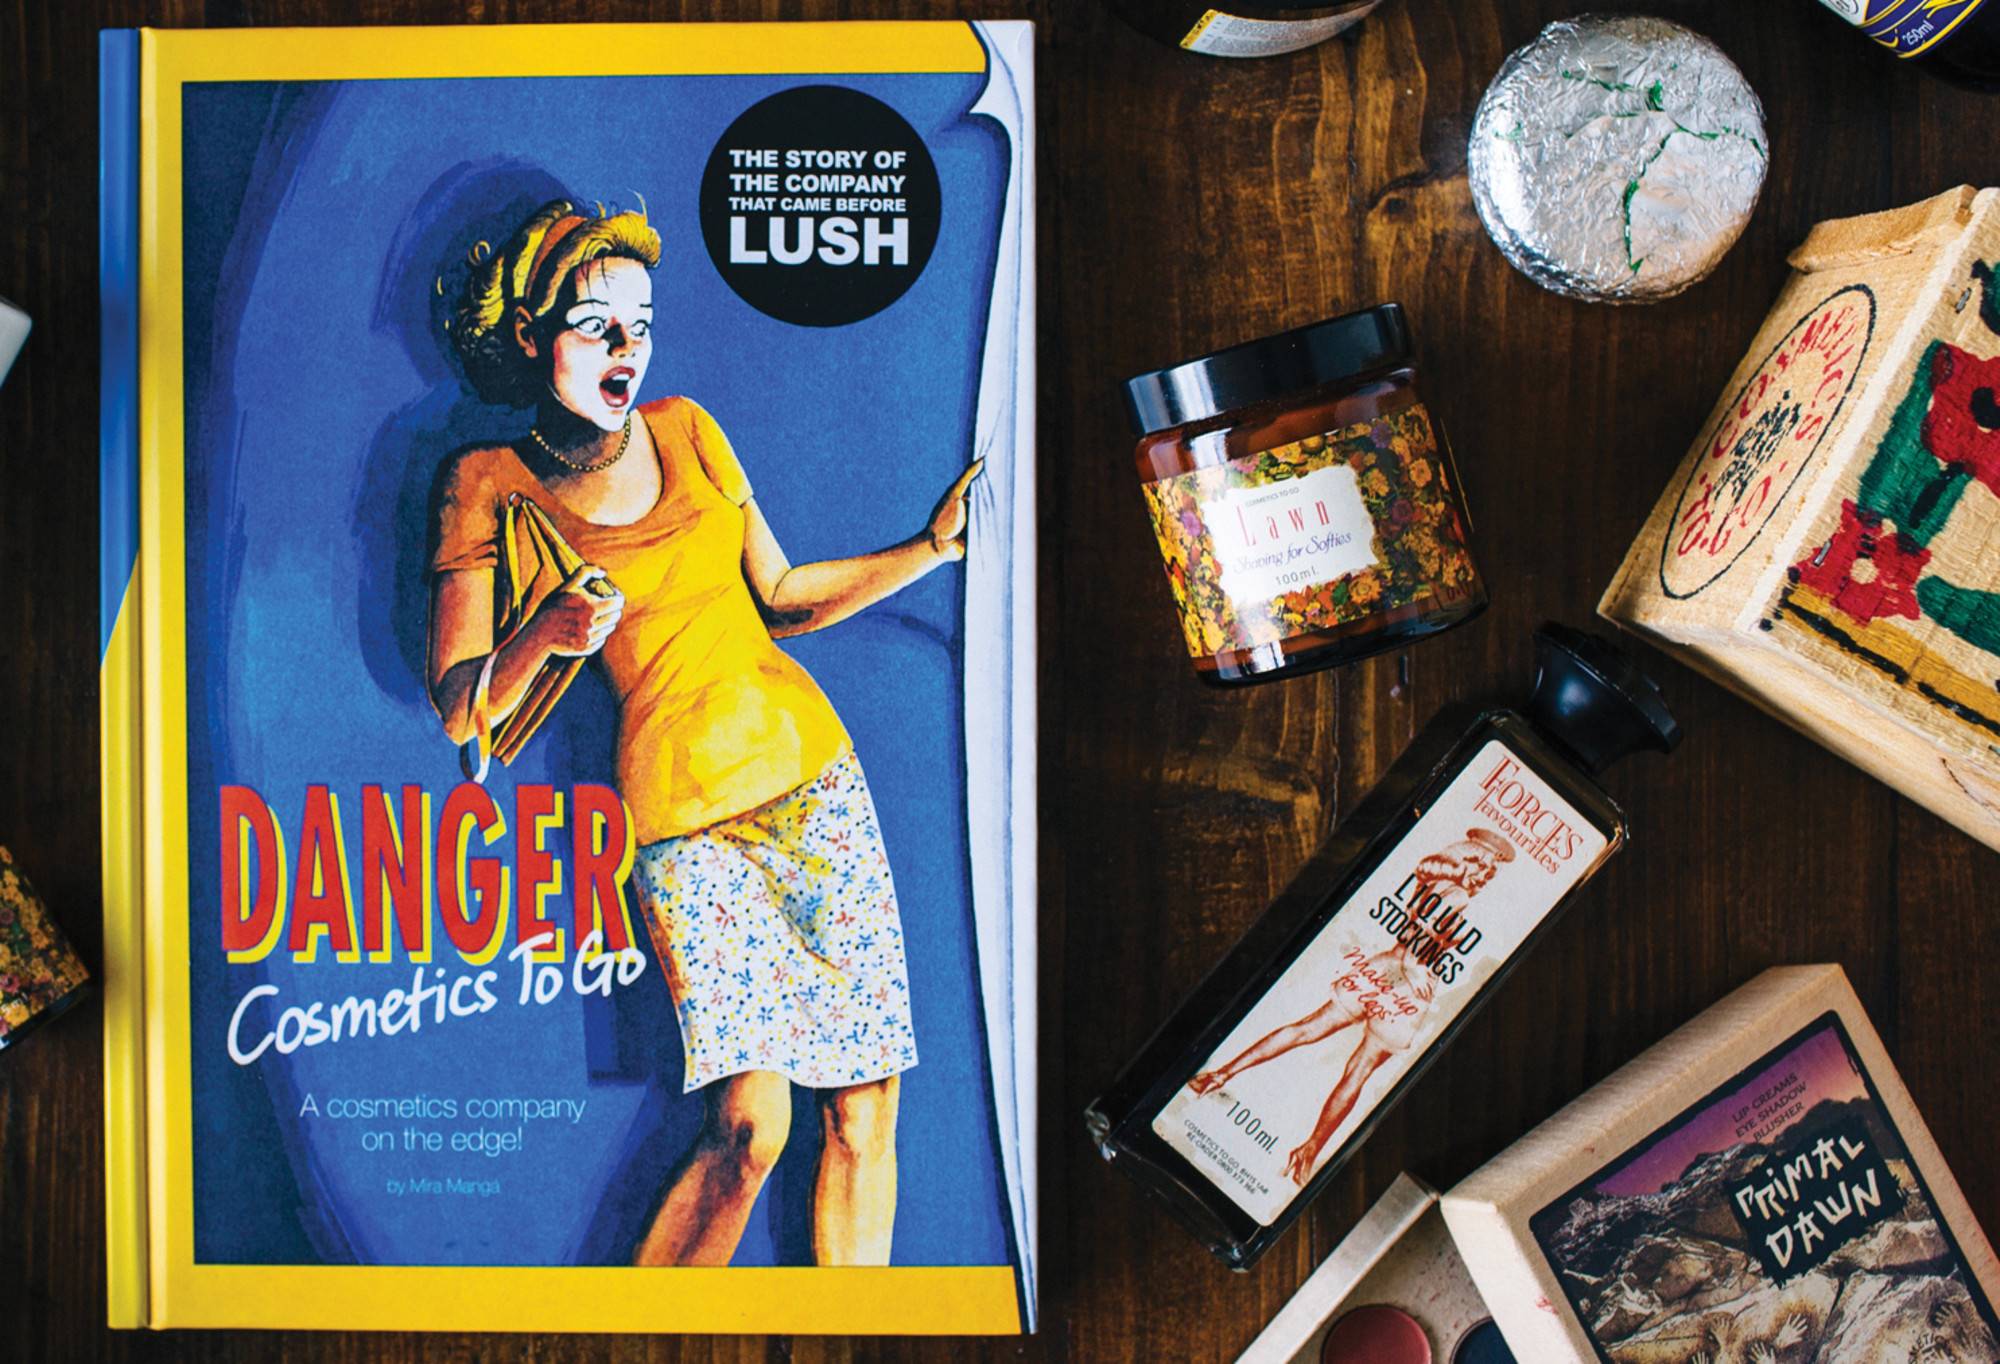 The book presented next to older style lush business products.